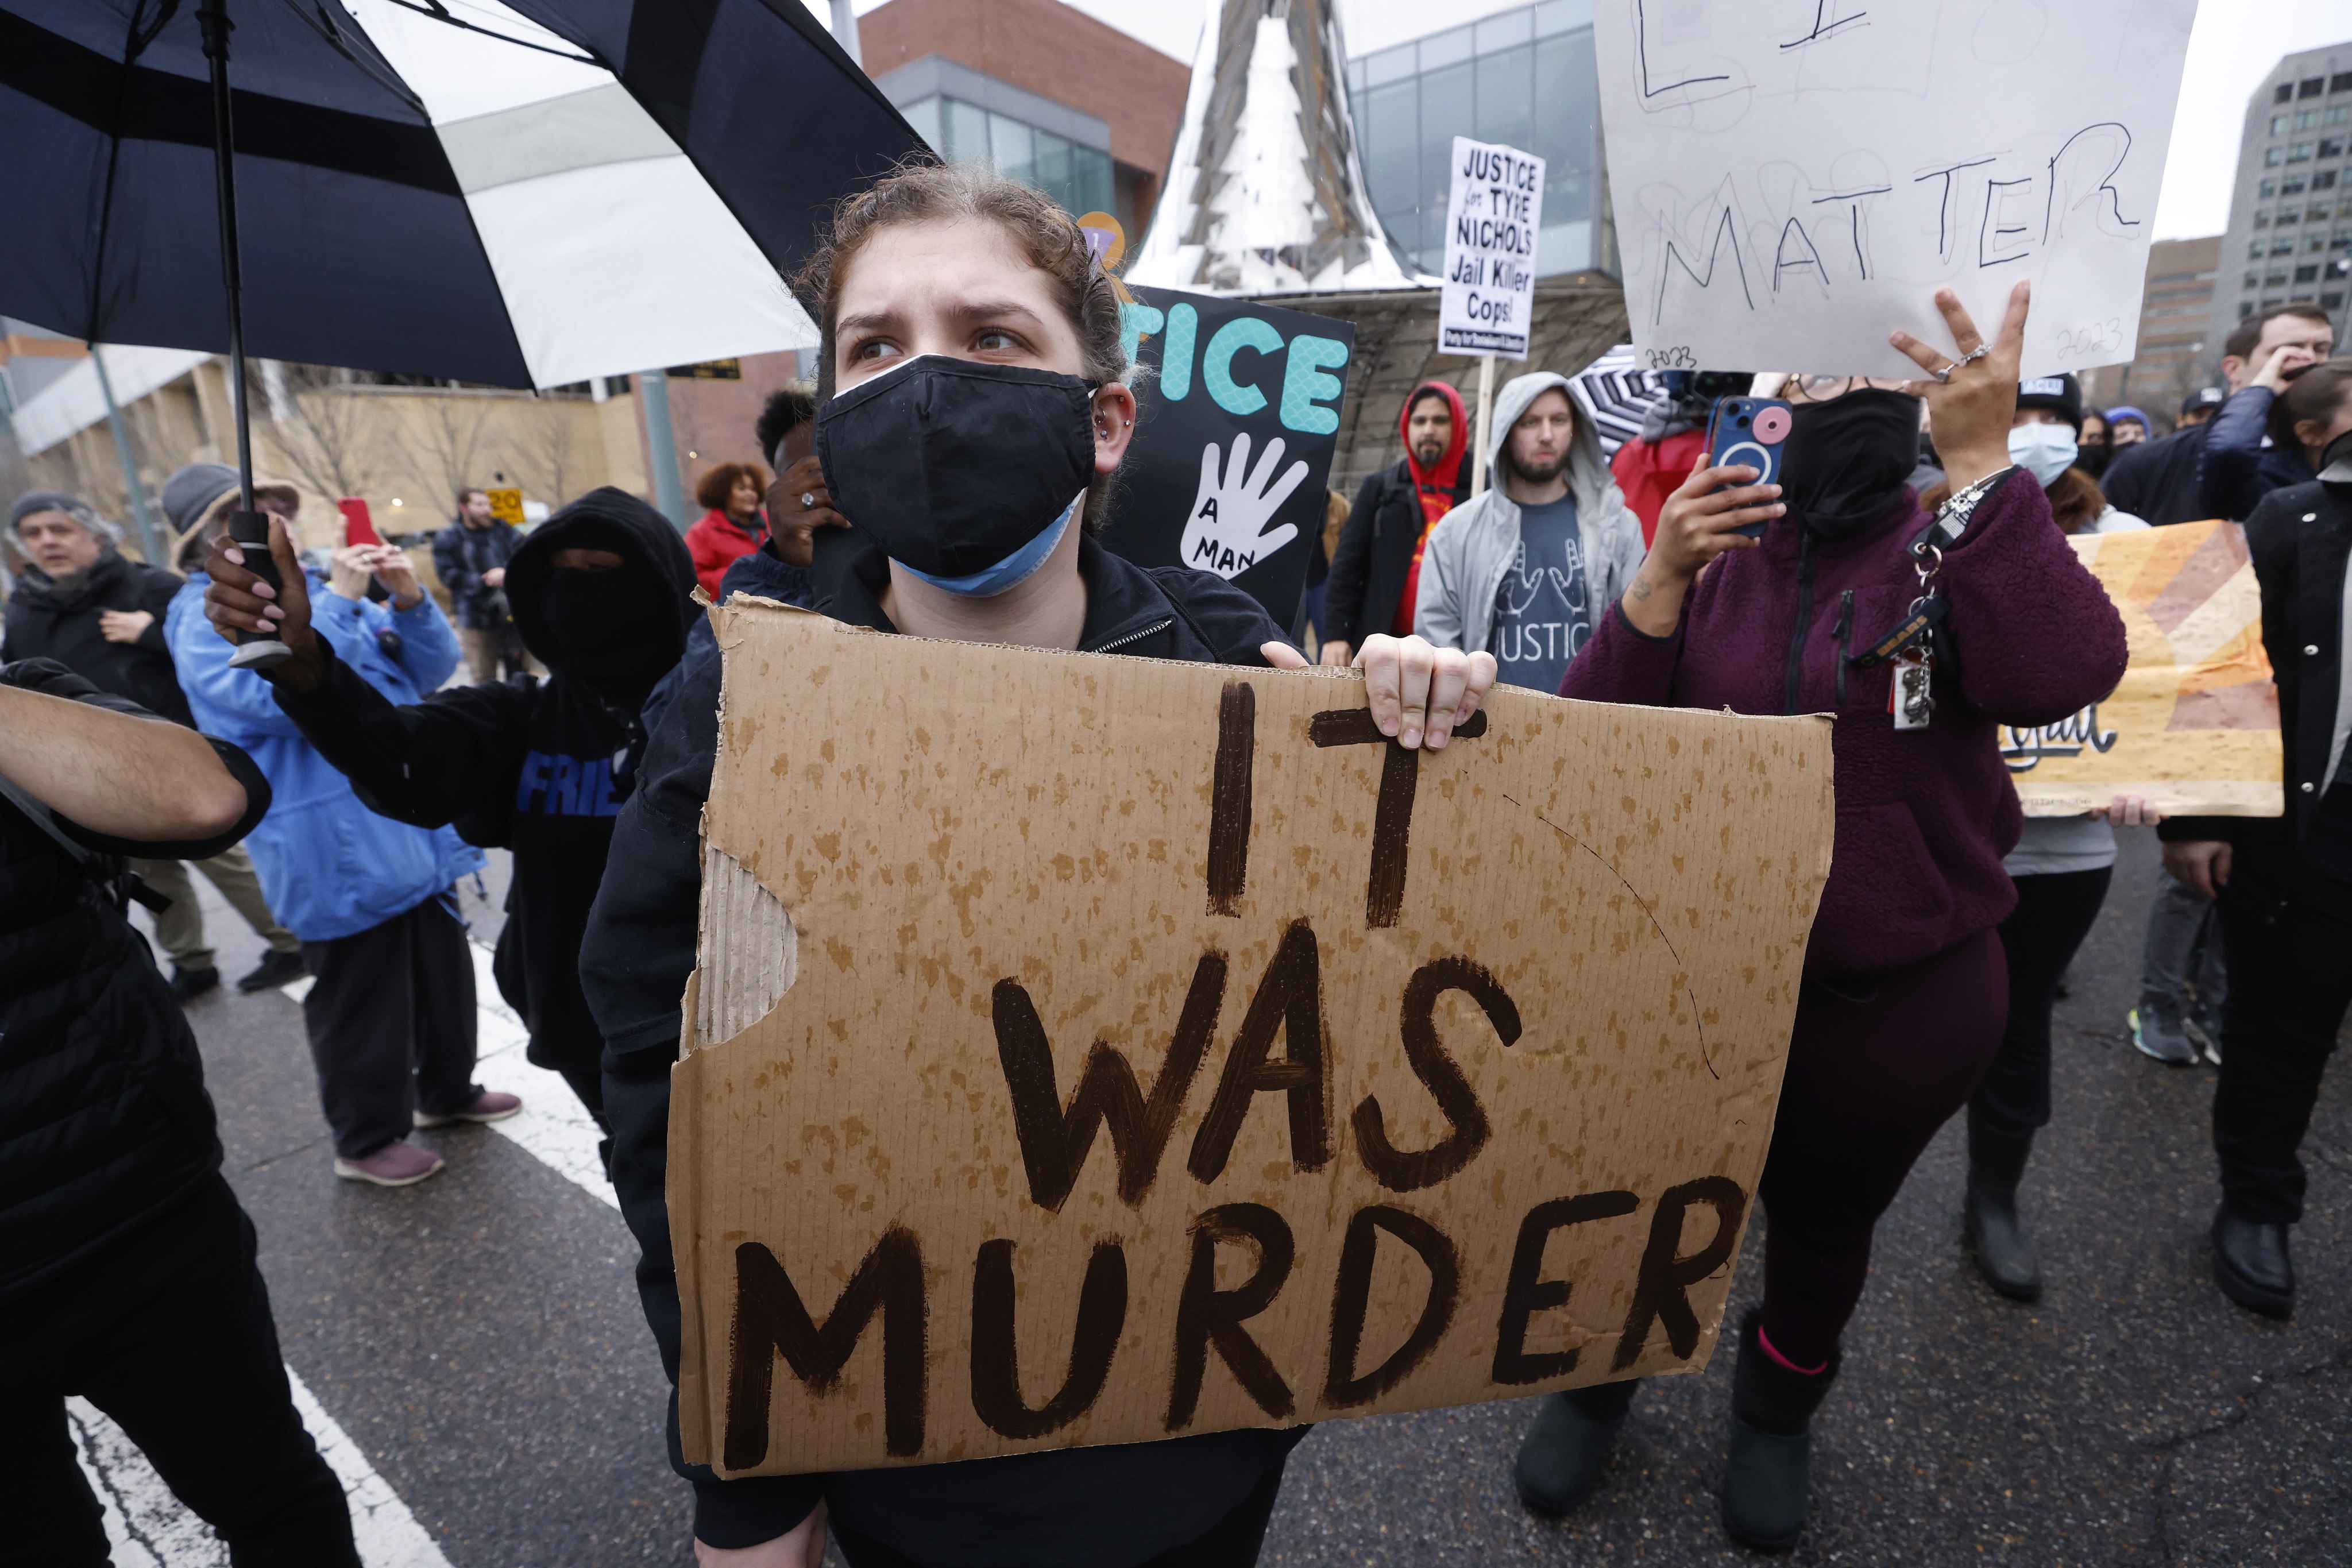 Protesters march downtown in Memphis, Tennessee on Saturday, a day after the release of video footage showing the encounter earlier this month between Tyre Nichols and five Memphis police officers which resulted in Nichols’ beating and subsequent death. Photo: EPA-EFE